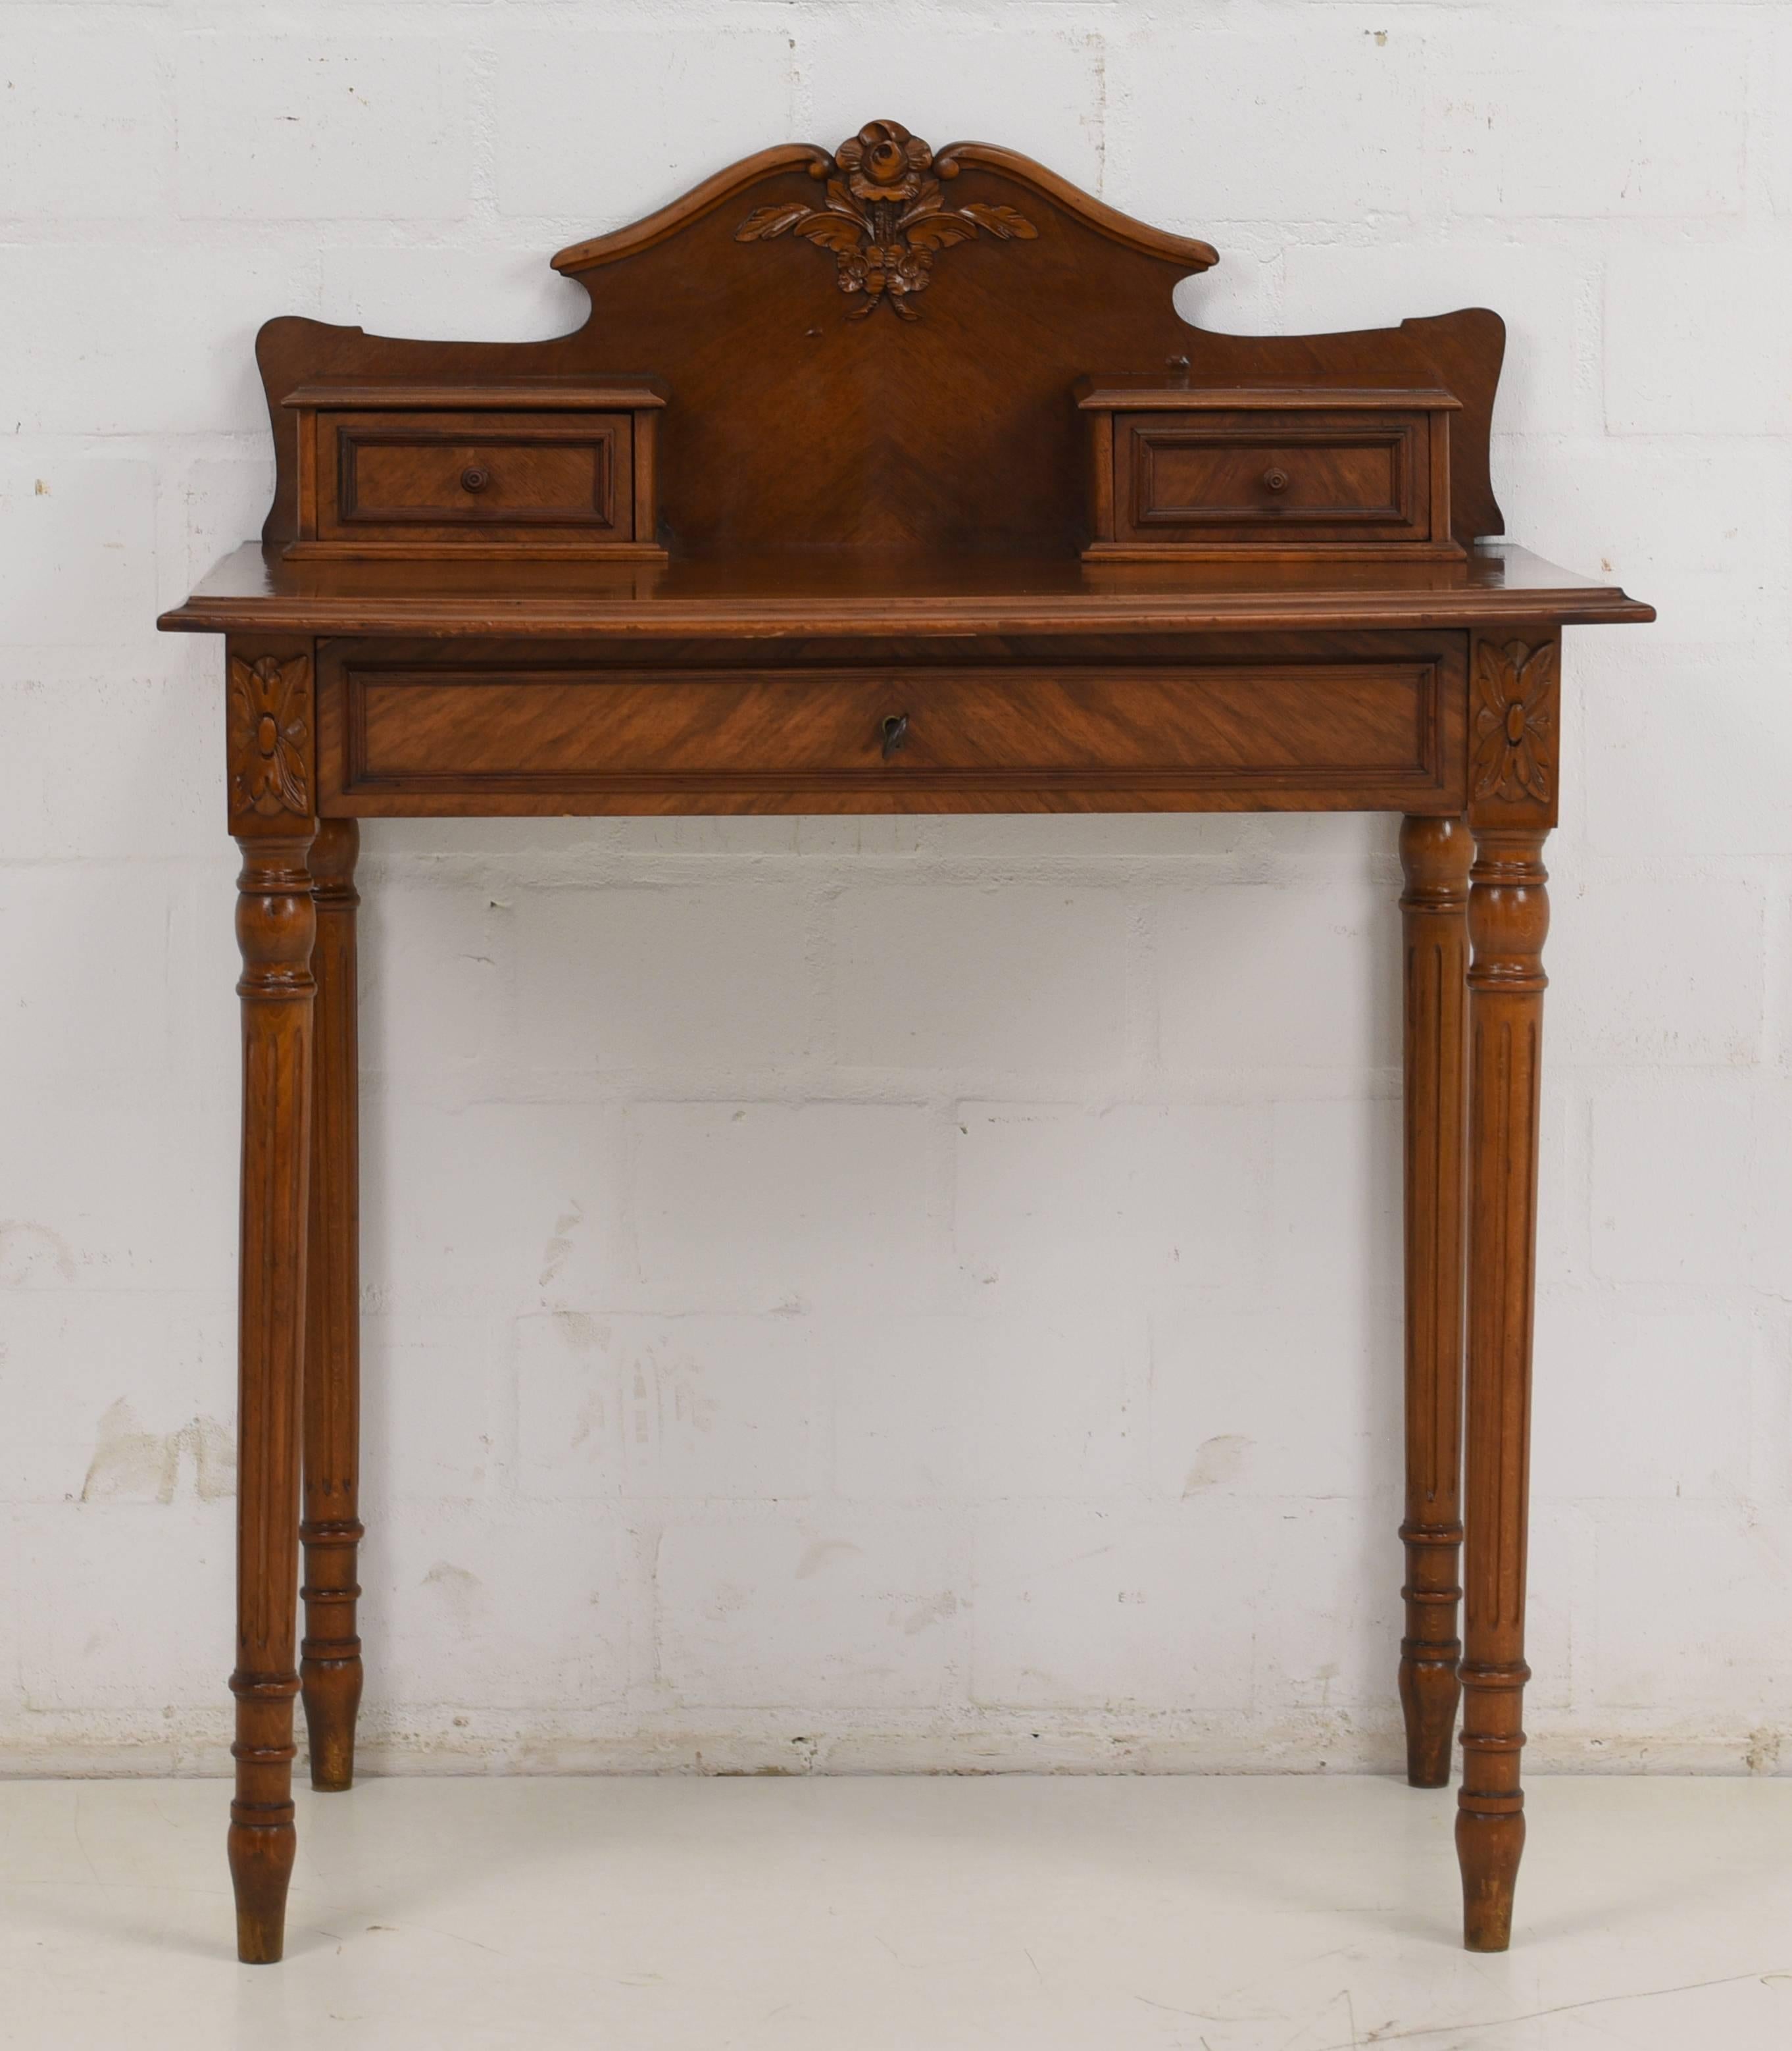 An Art Nouveau ladies desk from circa 1920. It has a wonderful walnut wood veneer with a squared veneer on the plate. Above the plate are two smaller drawers and below a bigger one which is lockable. Beautiful carving decor is at the back of the